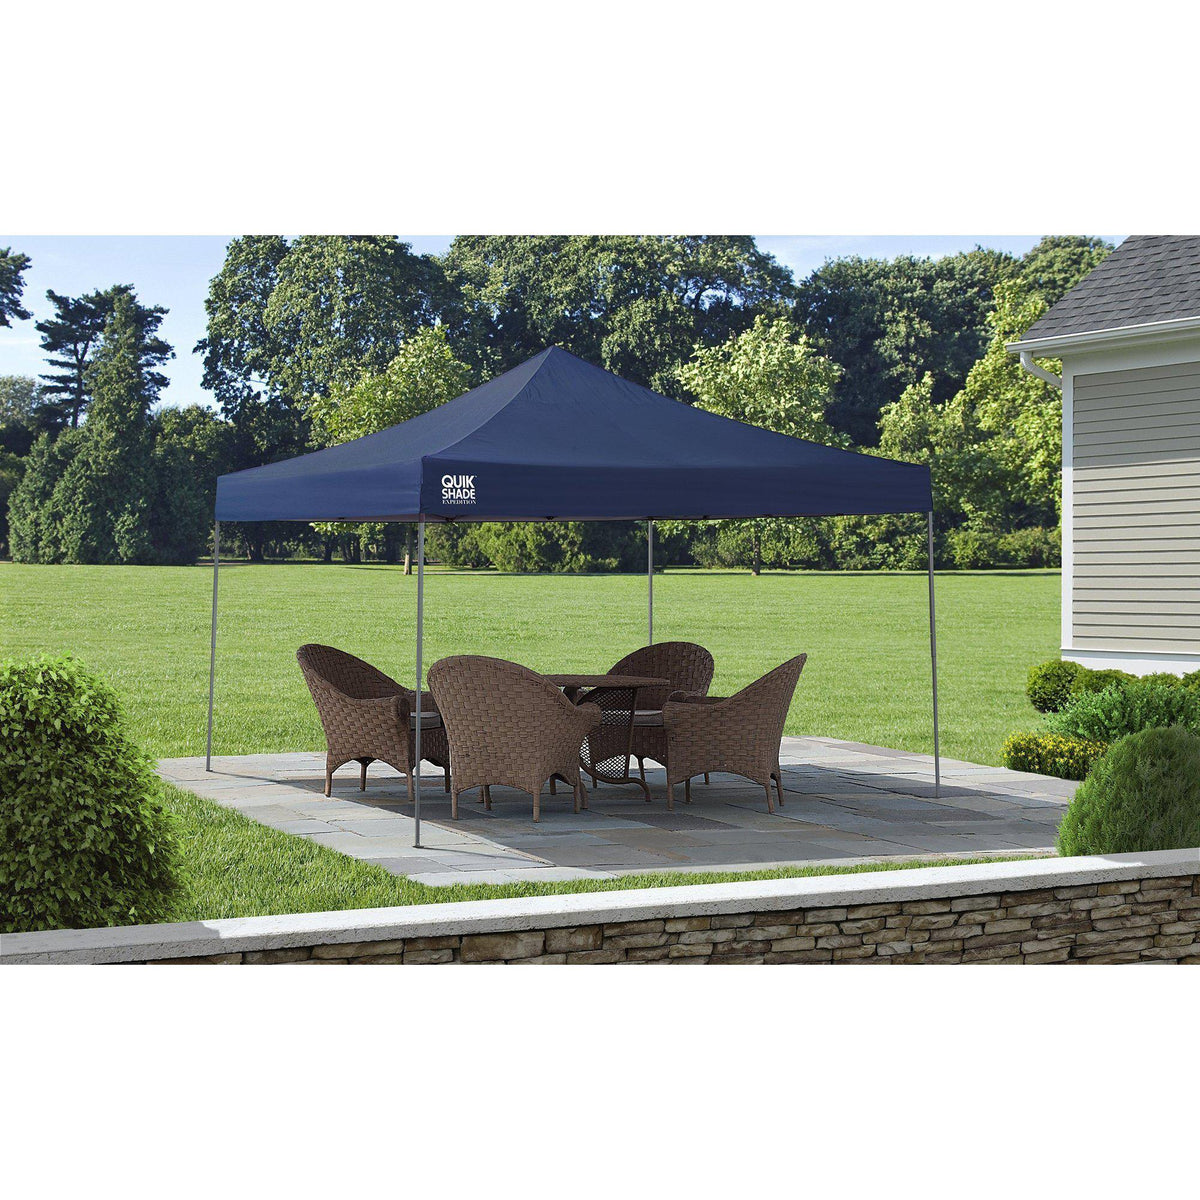 Quik Shade Expedition 12 x 12 ft. Straight Leg Canopy, Twilight Blue